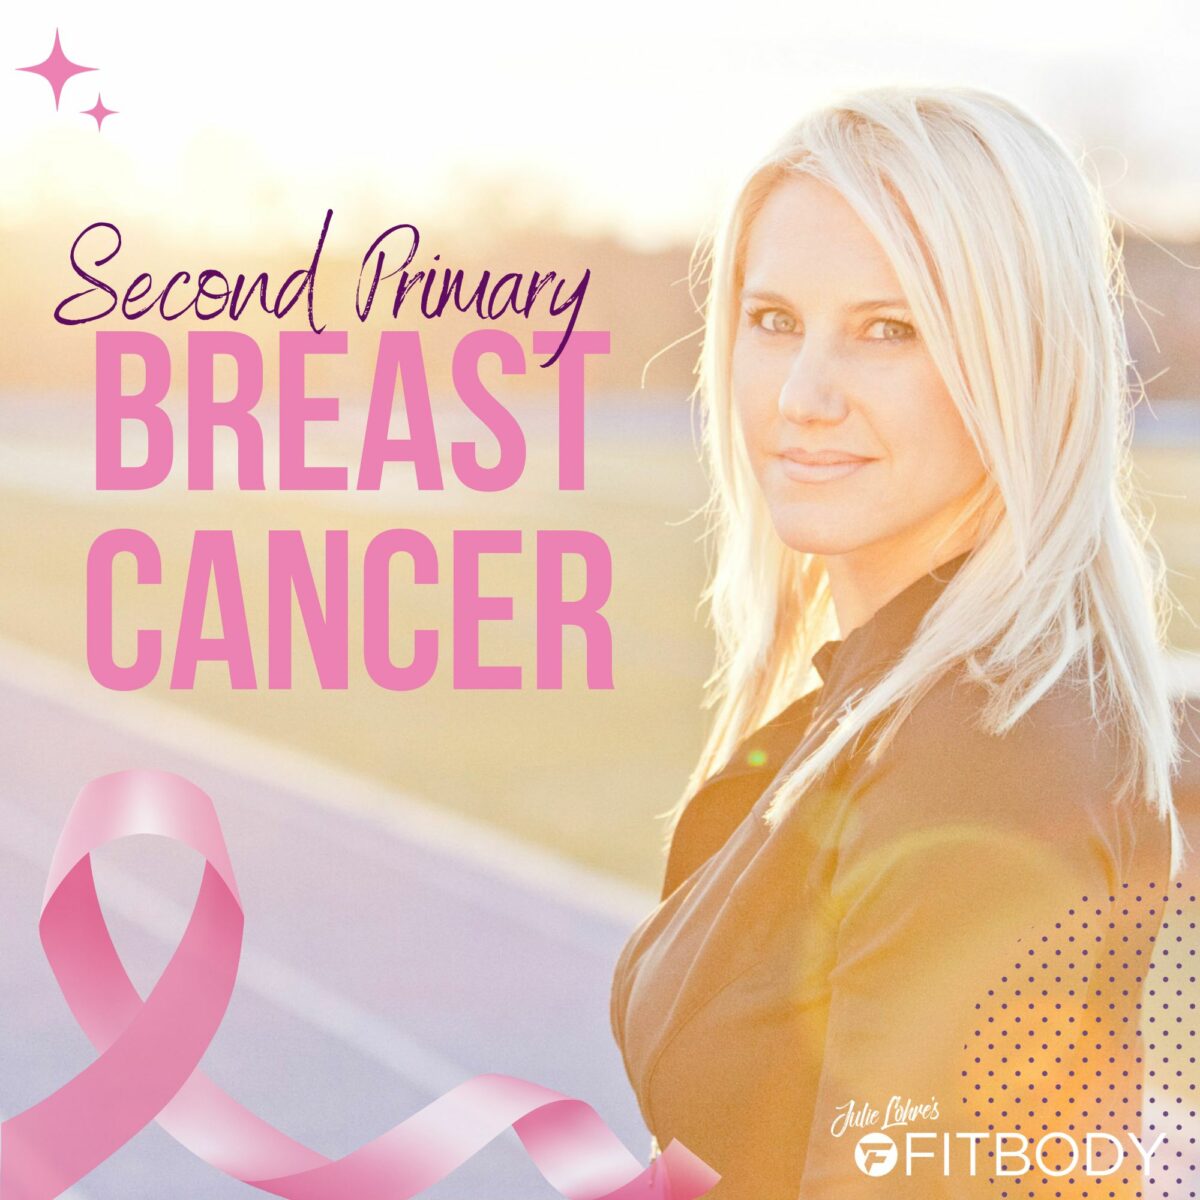 Second Primary Breast Cancer with Julie Lohre